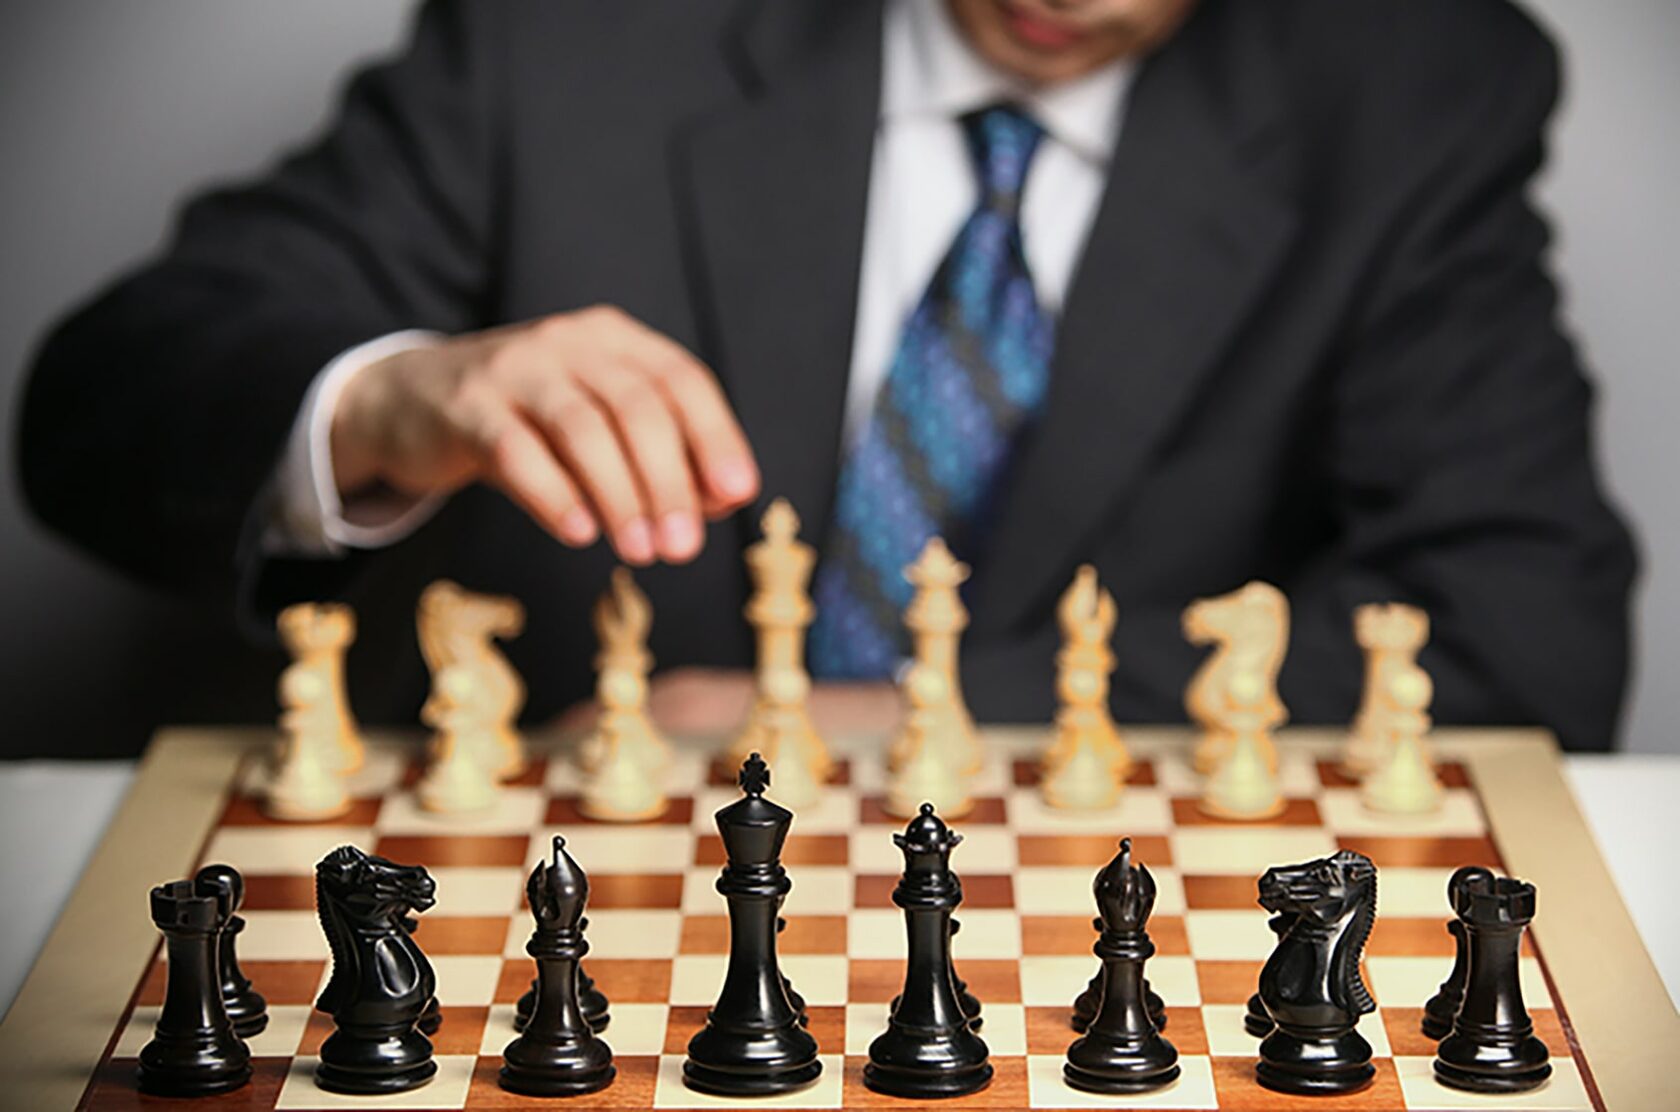 A man playing chess along on the board